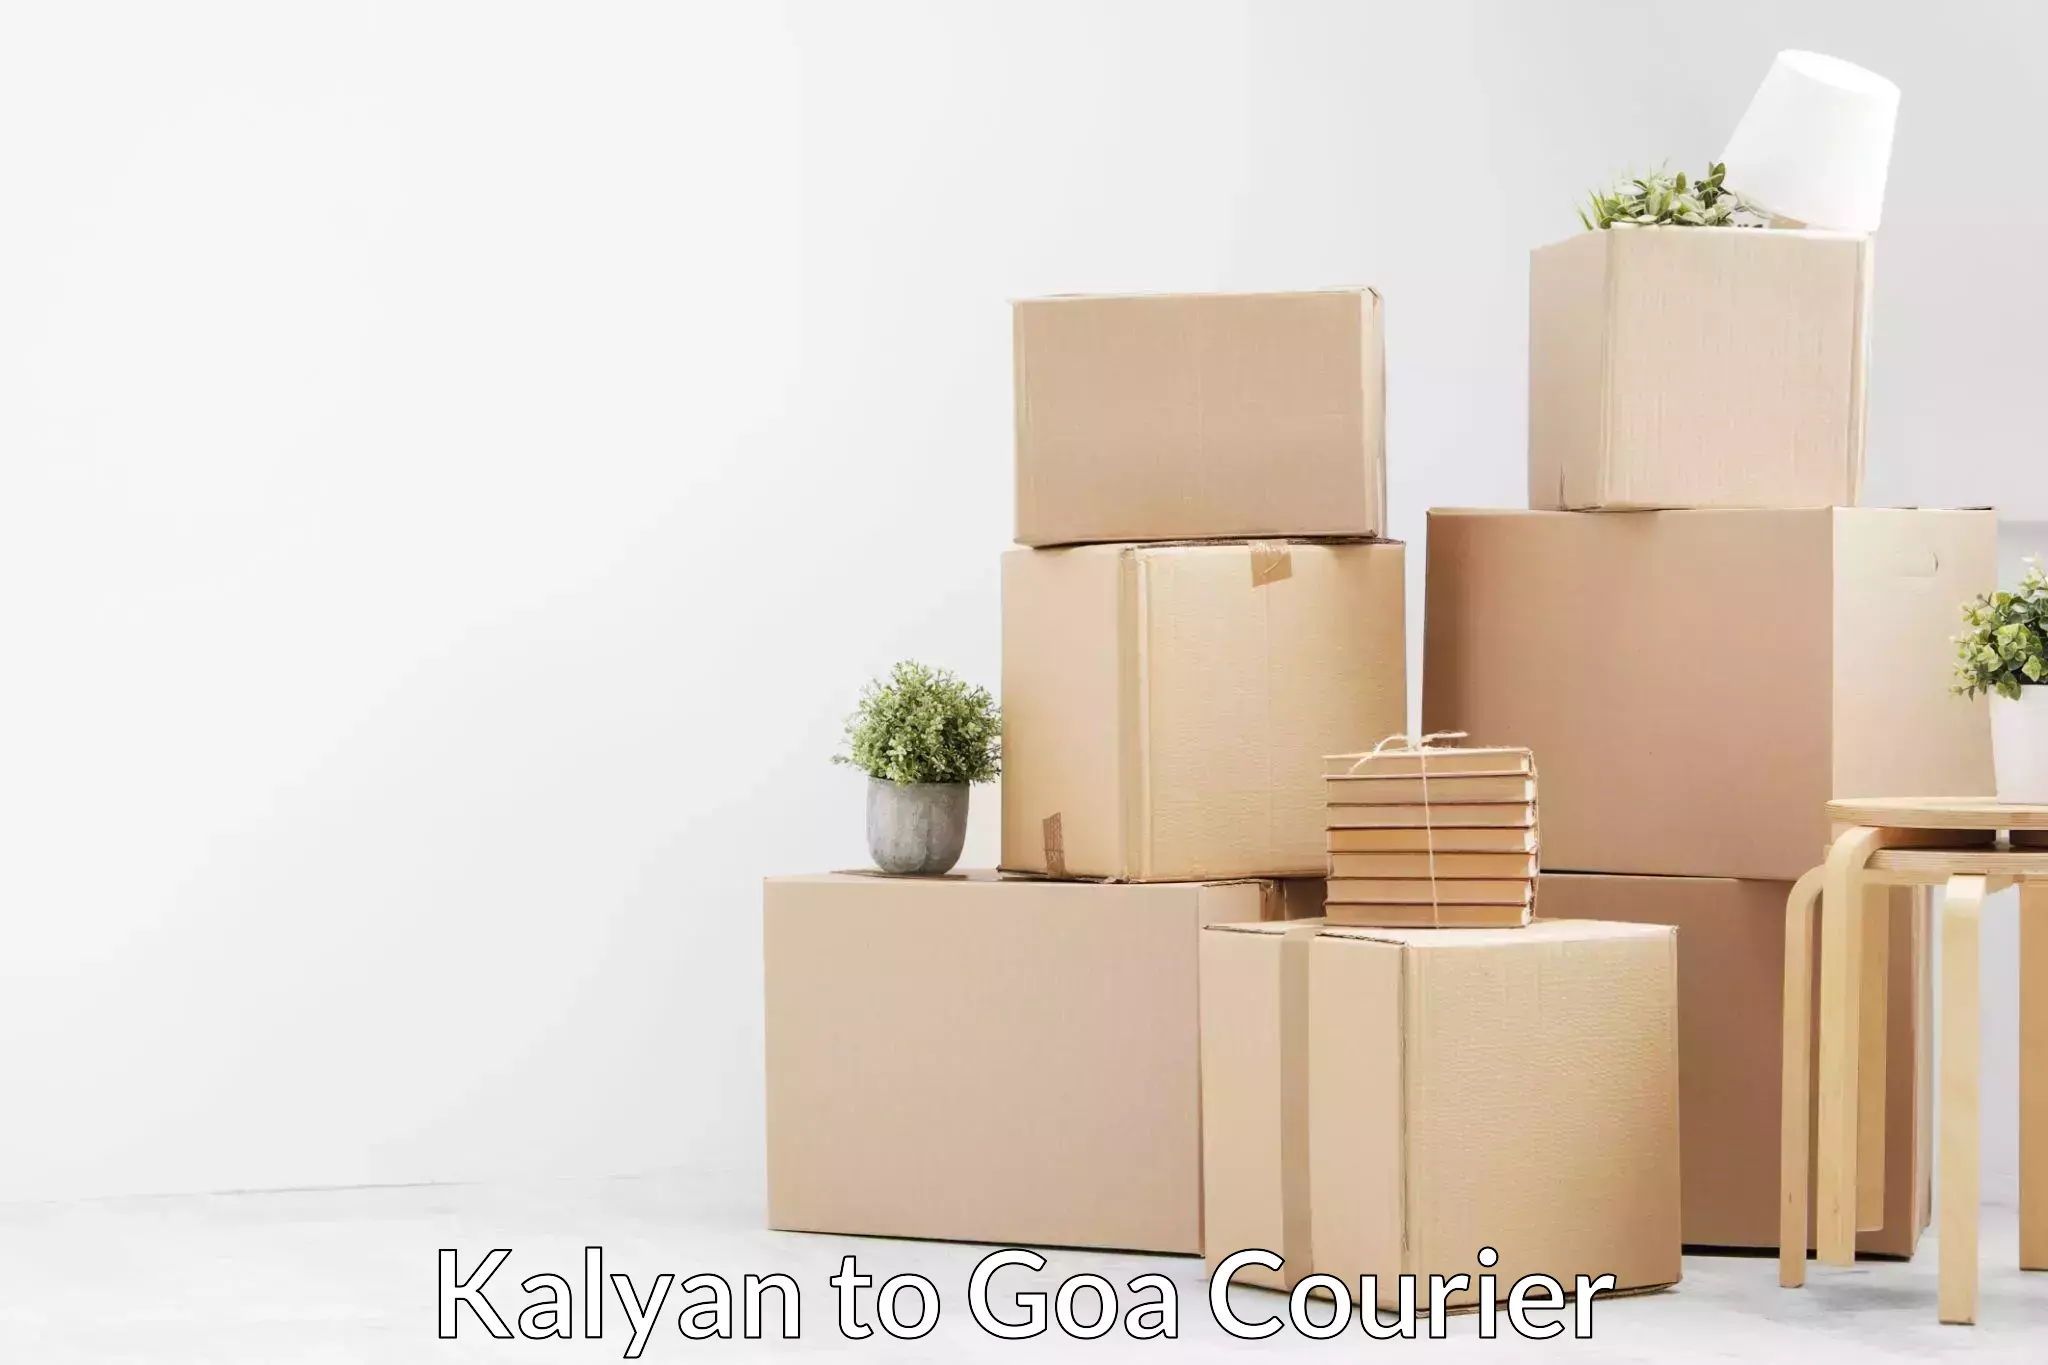 Quality relocation assistance Kalyan to Goa